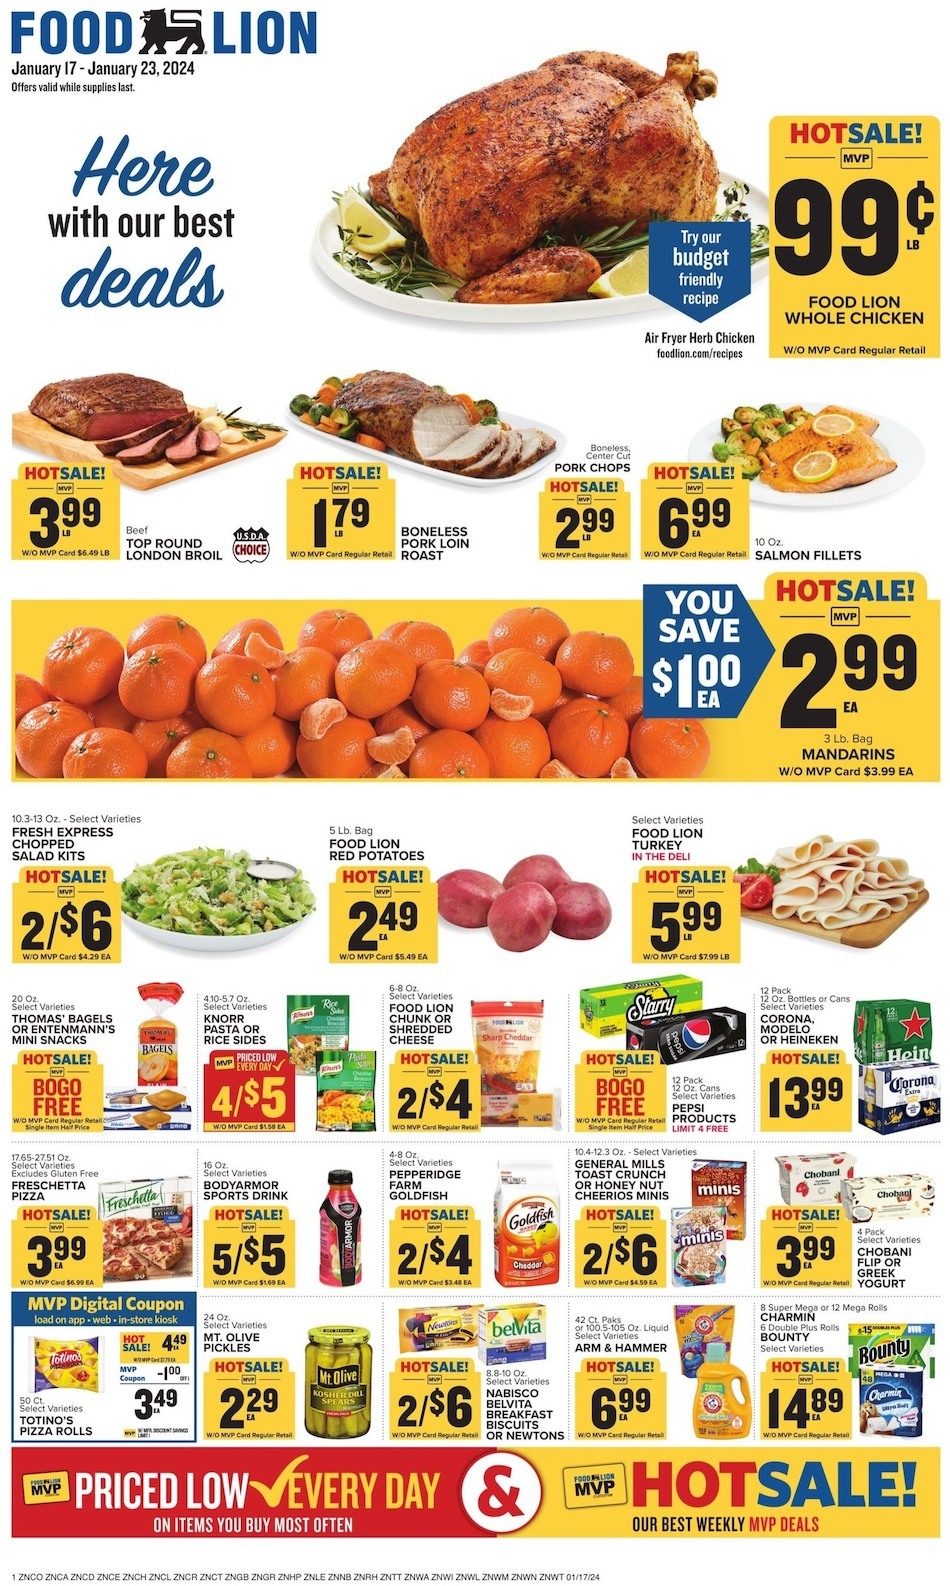 Food Lion Weekly Ad 17th – 23rd January 2024 Page 1